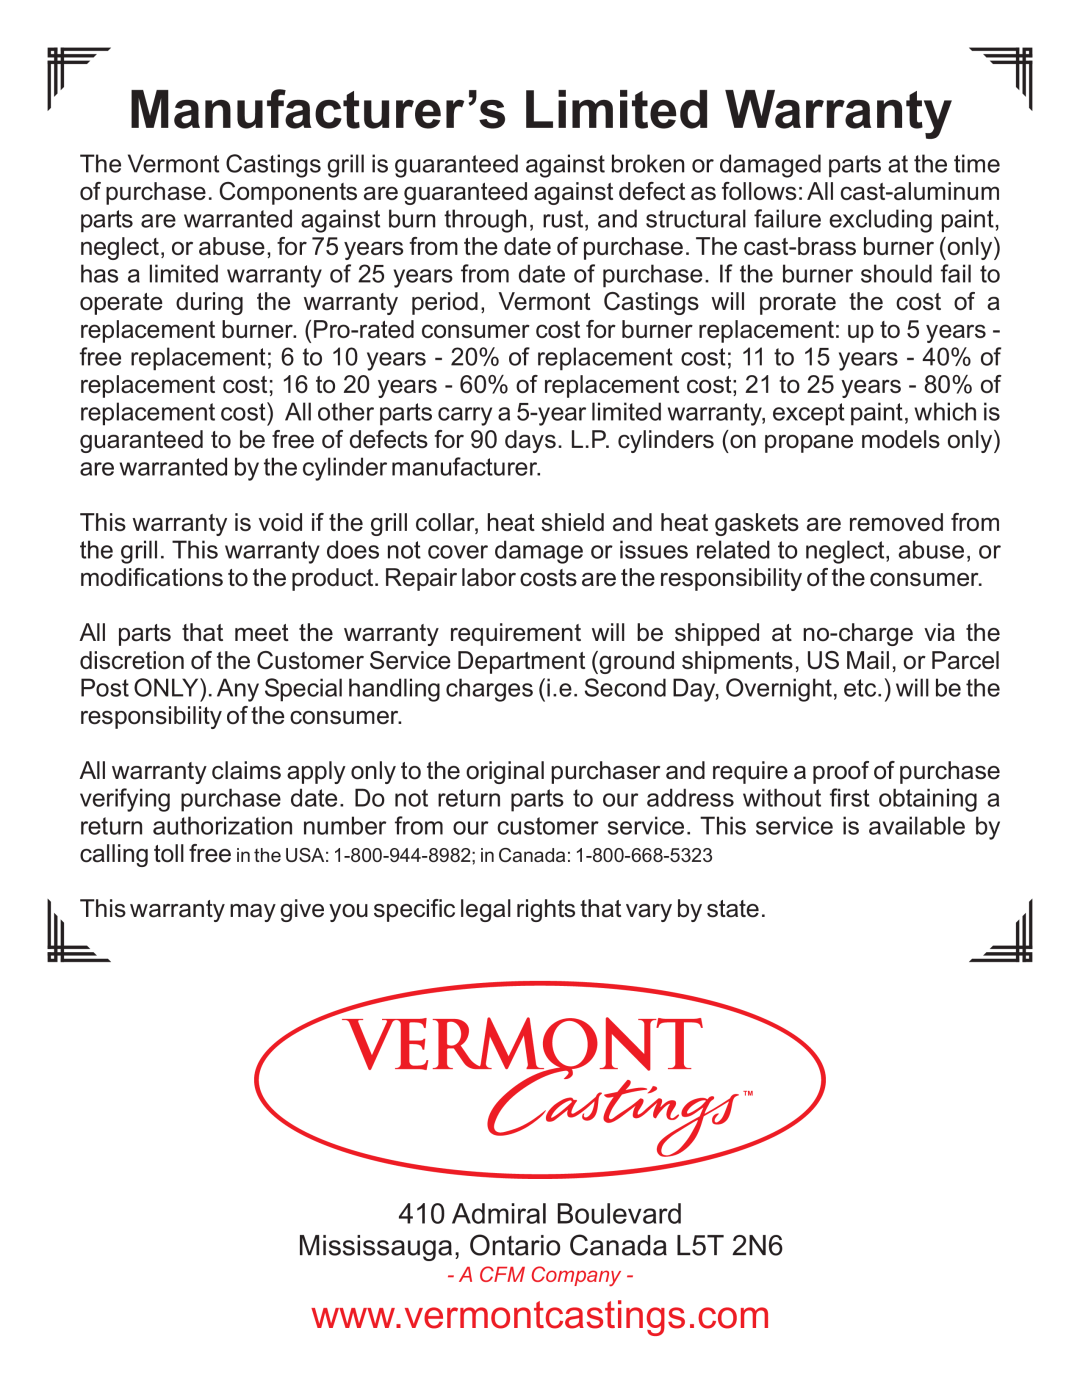 Vermont Casting VC0620P, VC0680P, VC0680N owner manual Manufacturer’s Limited Warranty, Admiral Boulevard 